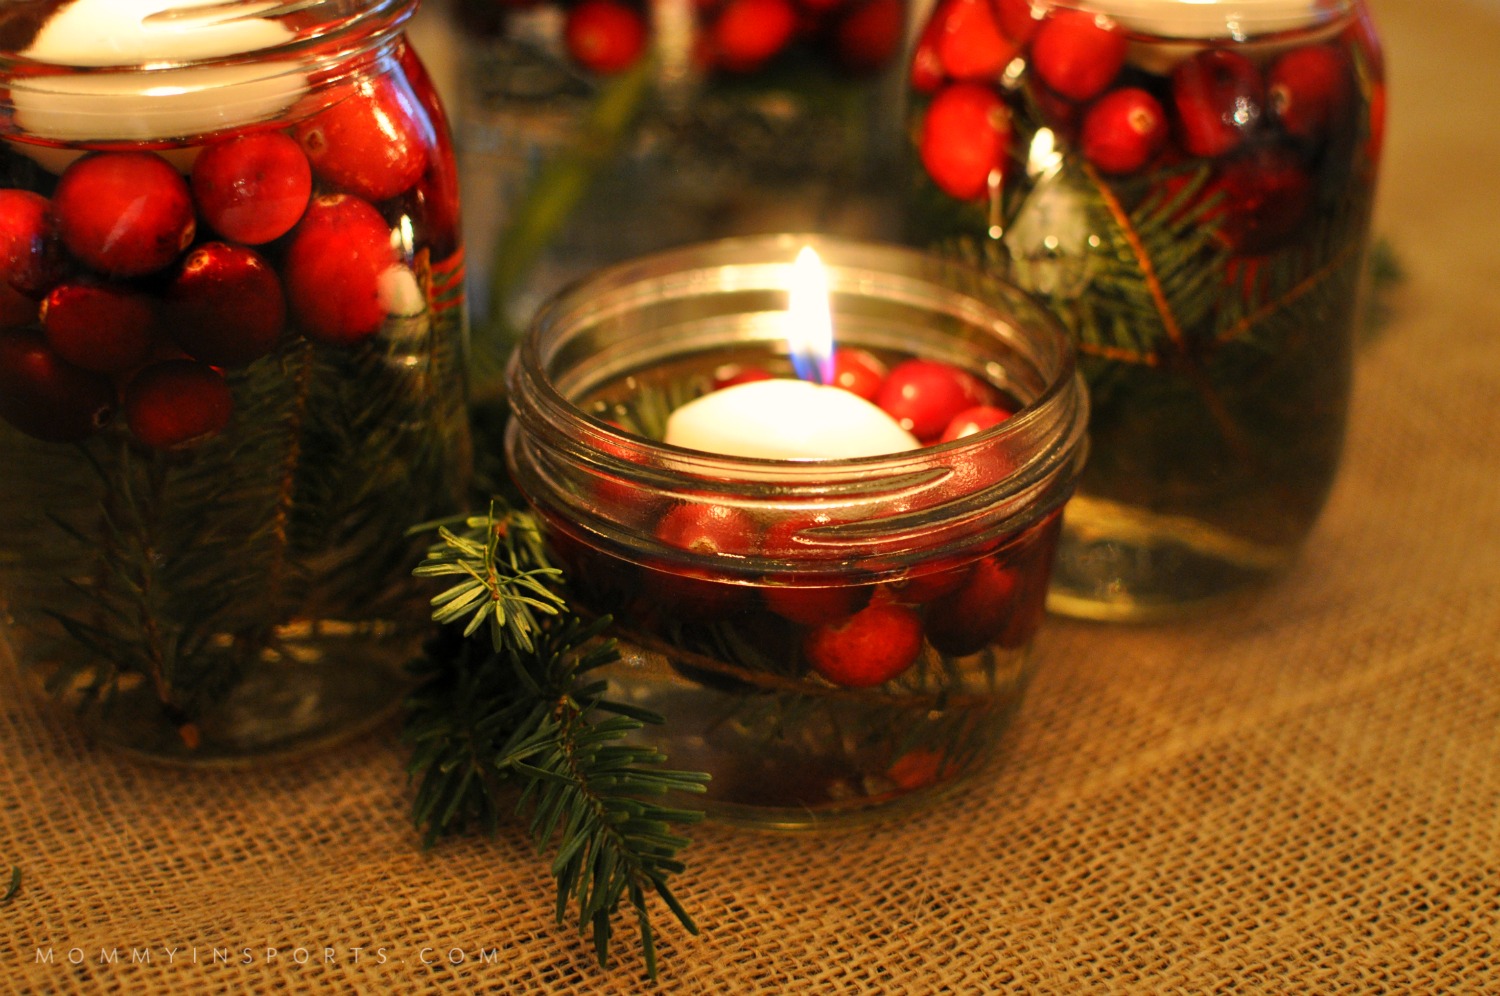 Mason Jars are perfect to use for a holiday centerpiece! Fill them with flowers, cranberries, evergreen clippings, or even pine cones for a pretty DIY holiday centerpiece!